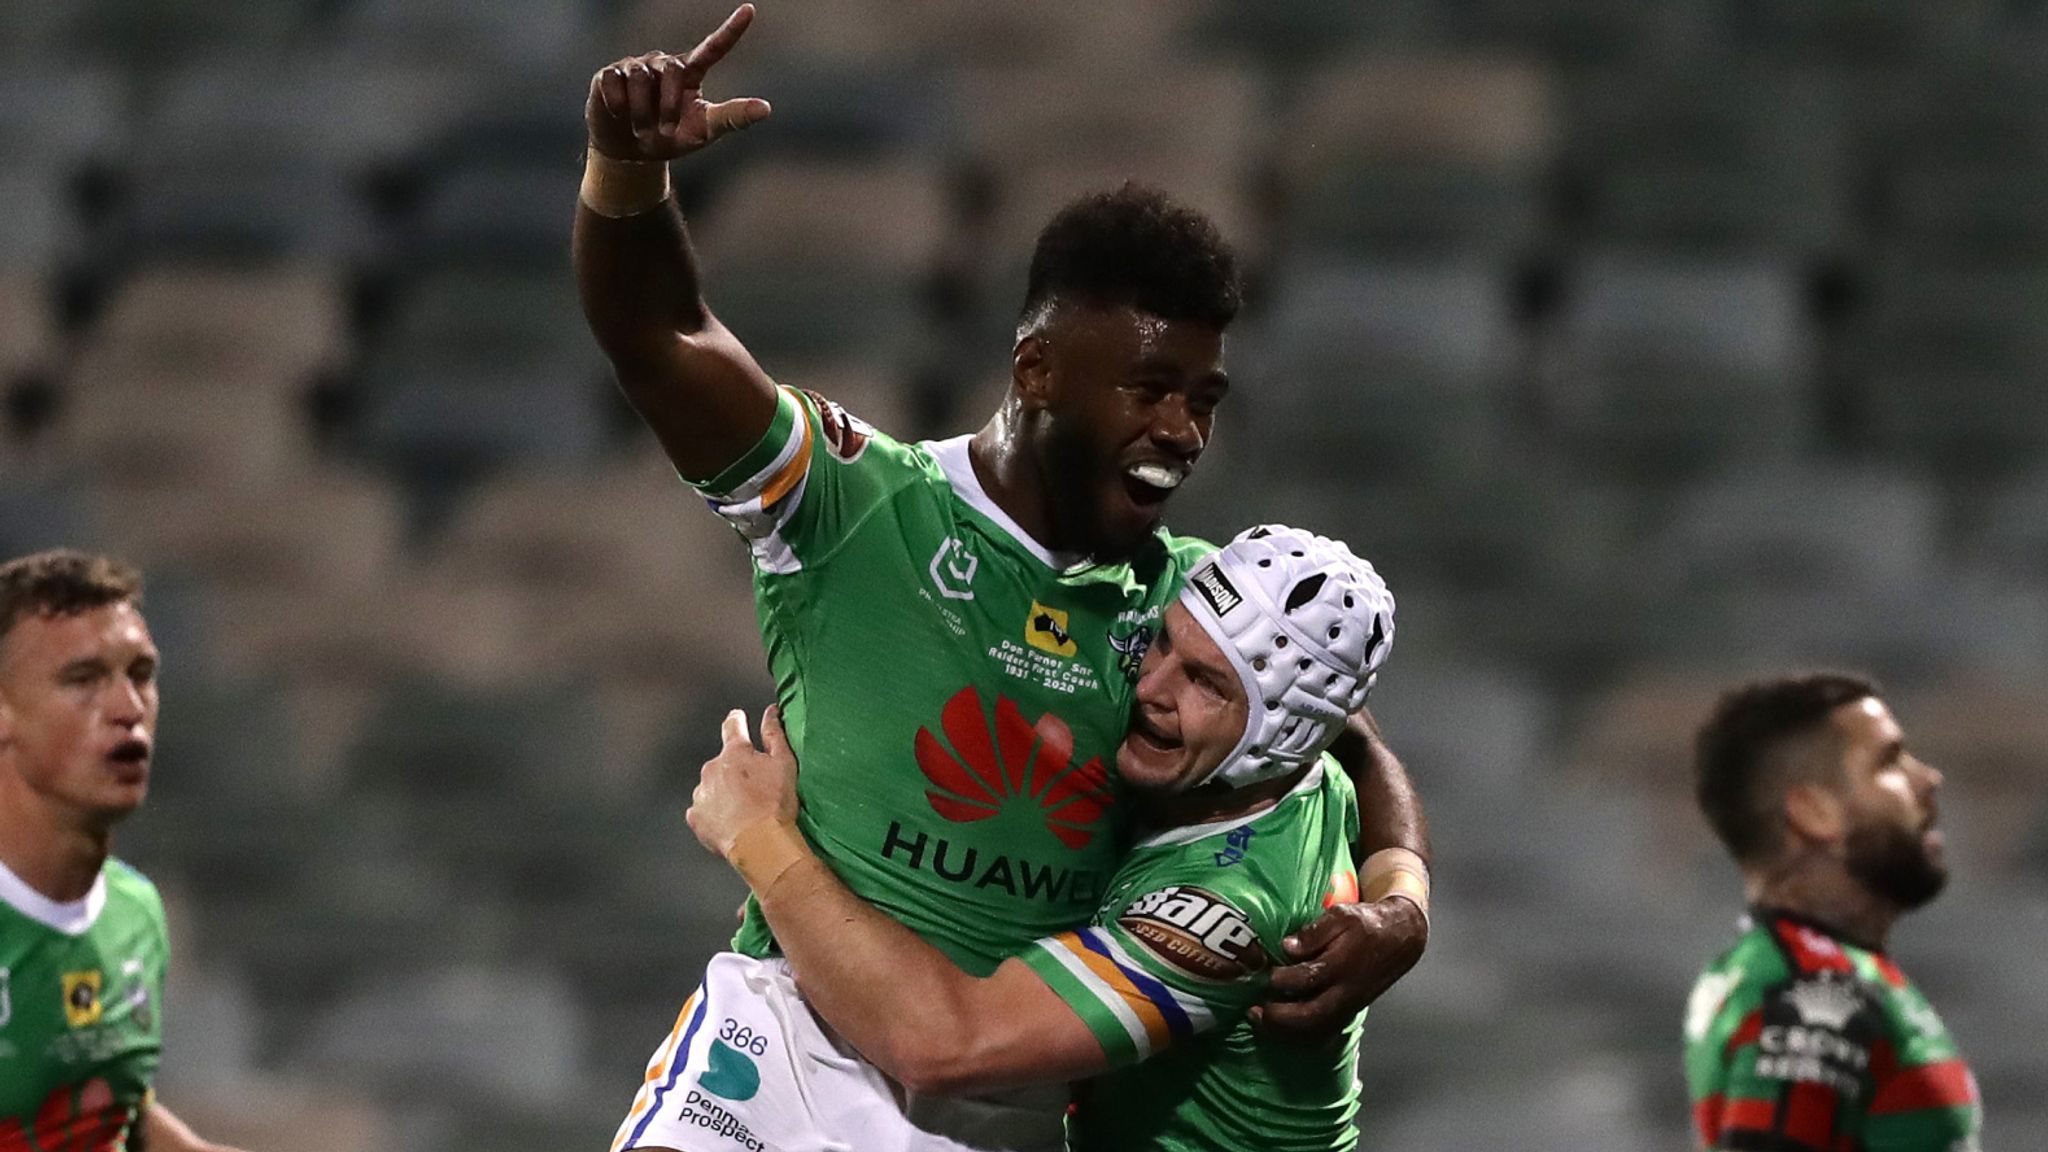 Saturday S Nrl Wrap Sydney Roosters Cronulla Sharks And Canberra Raiders Victorious Rugby League News Sky Sports